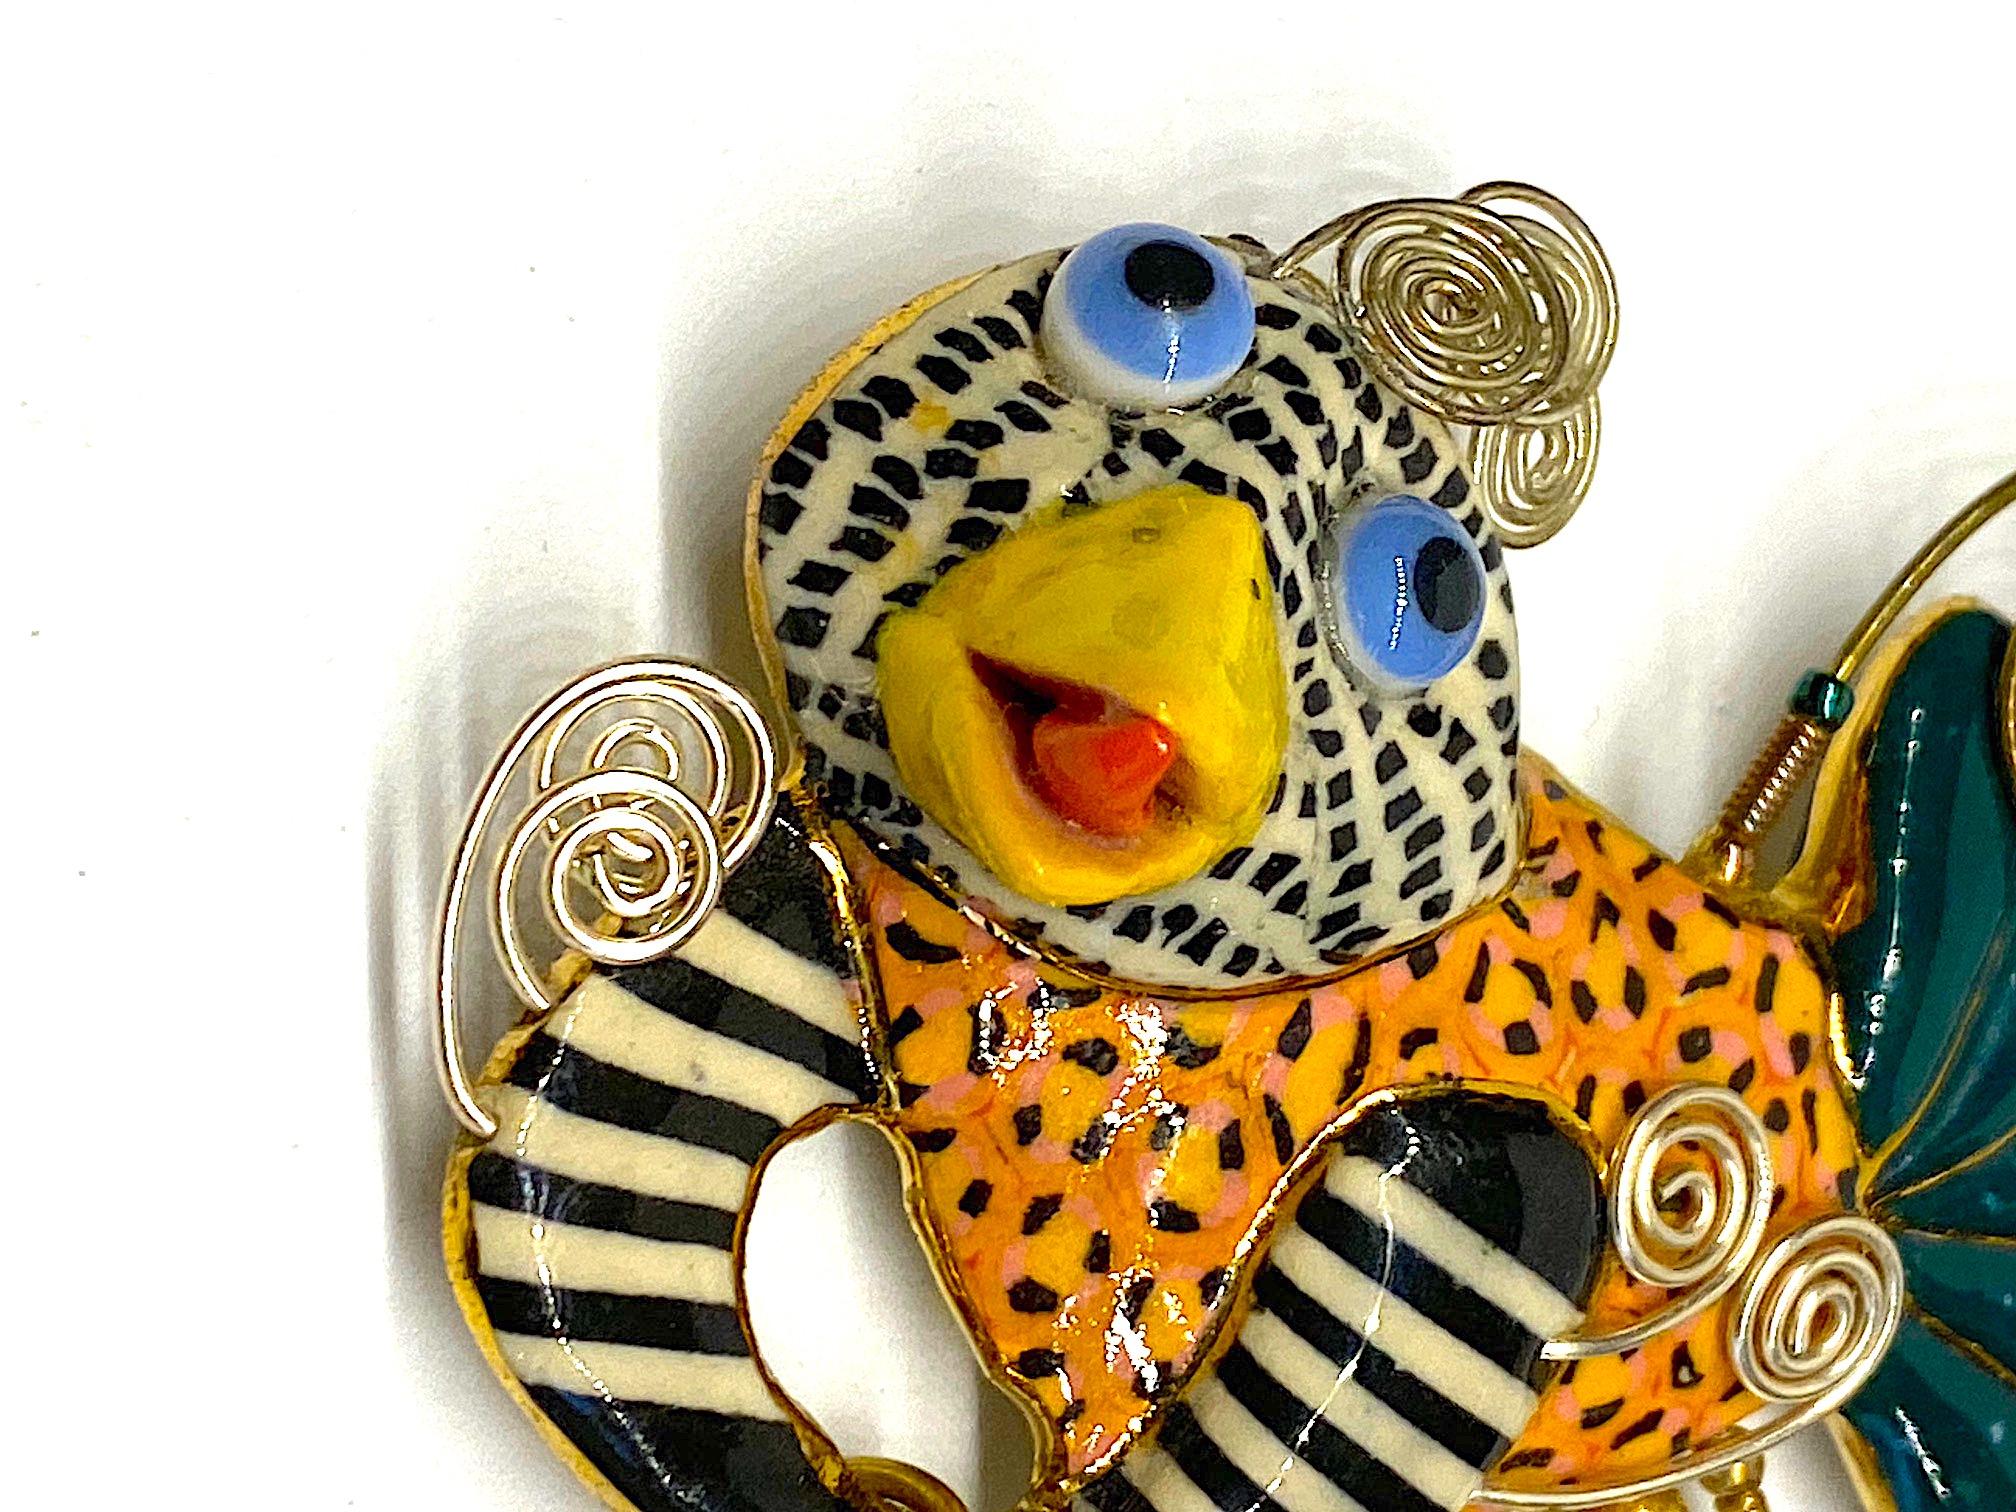 Cynthia Chuang, Jewelry 10, Porcelain & Glass Chicken with Basket Brooch 4